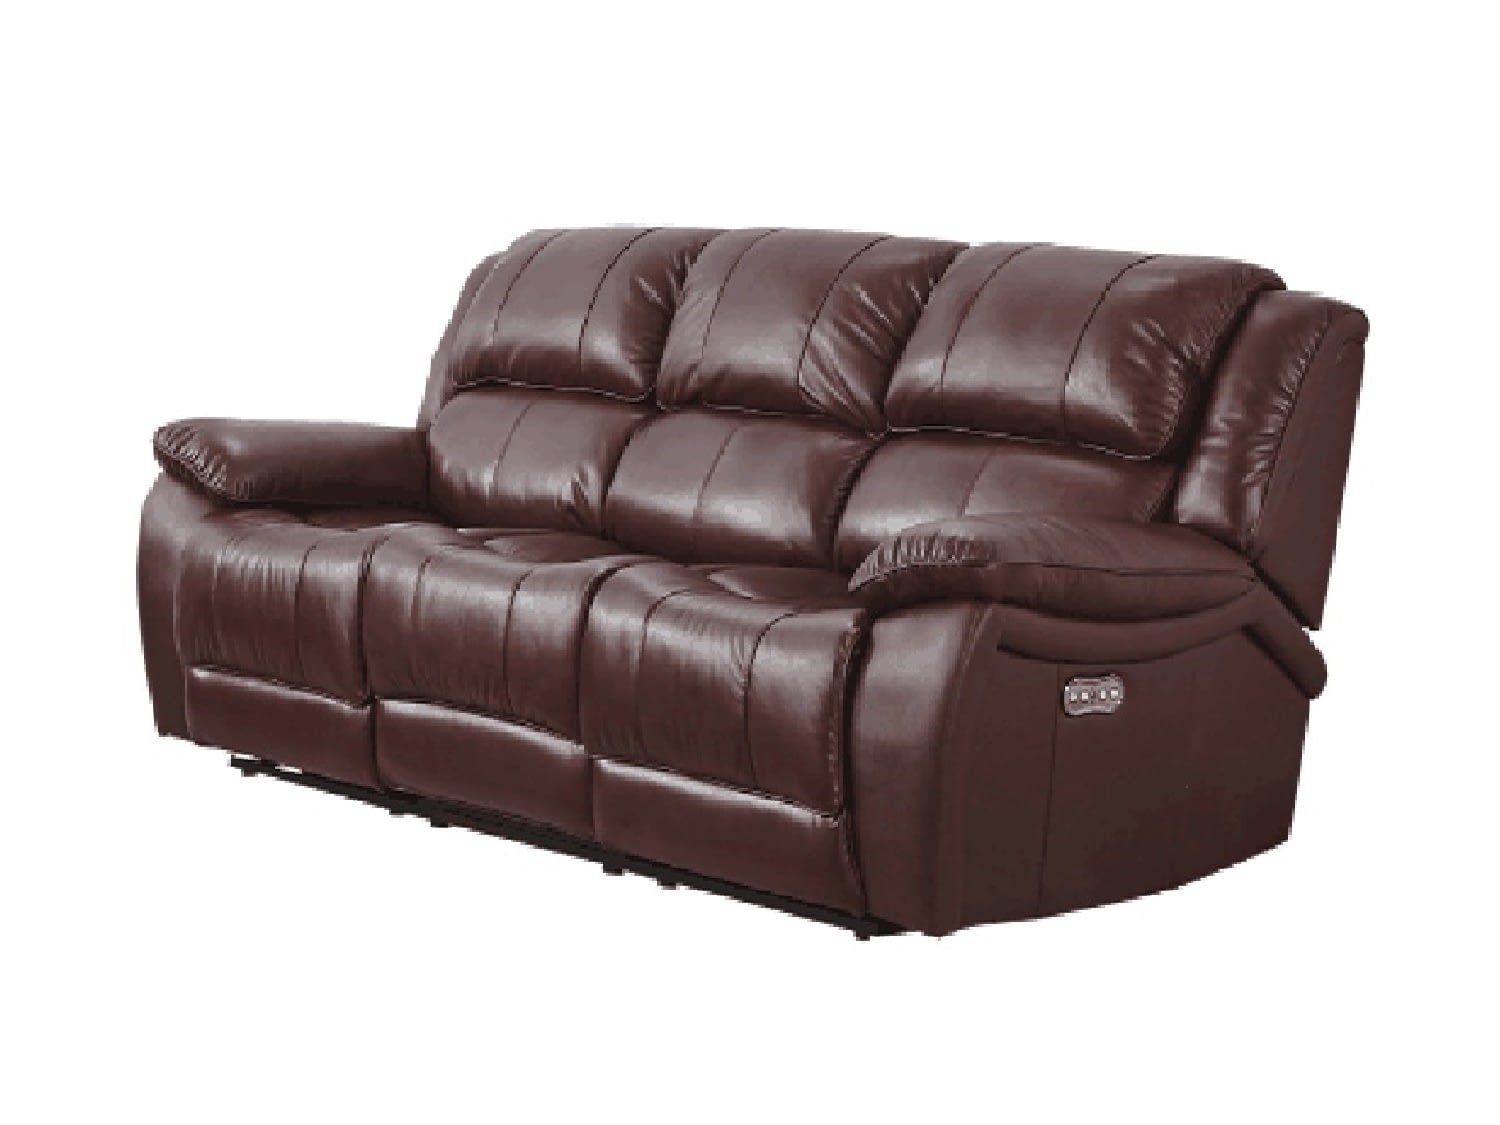 MONTCLARE Power Leather Reclining Sofa